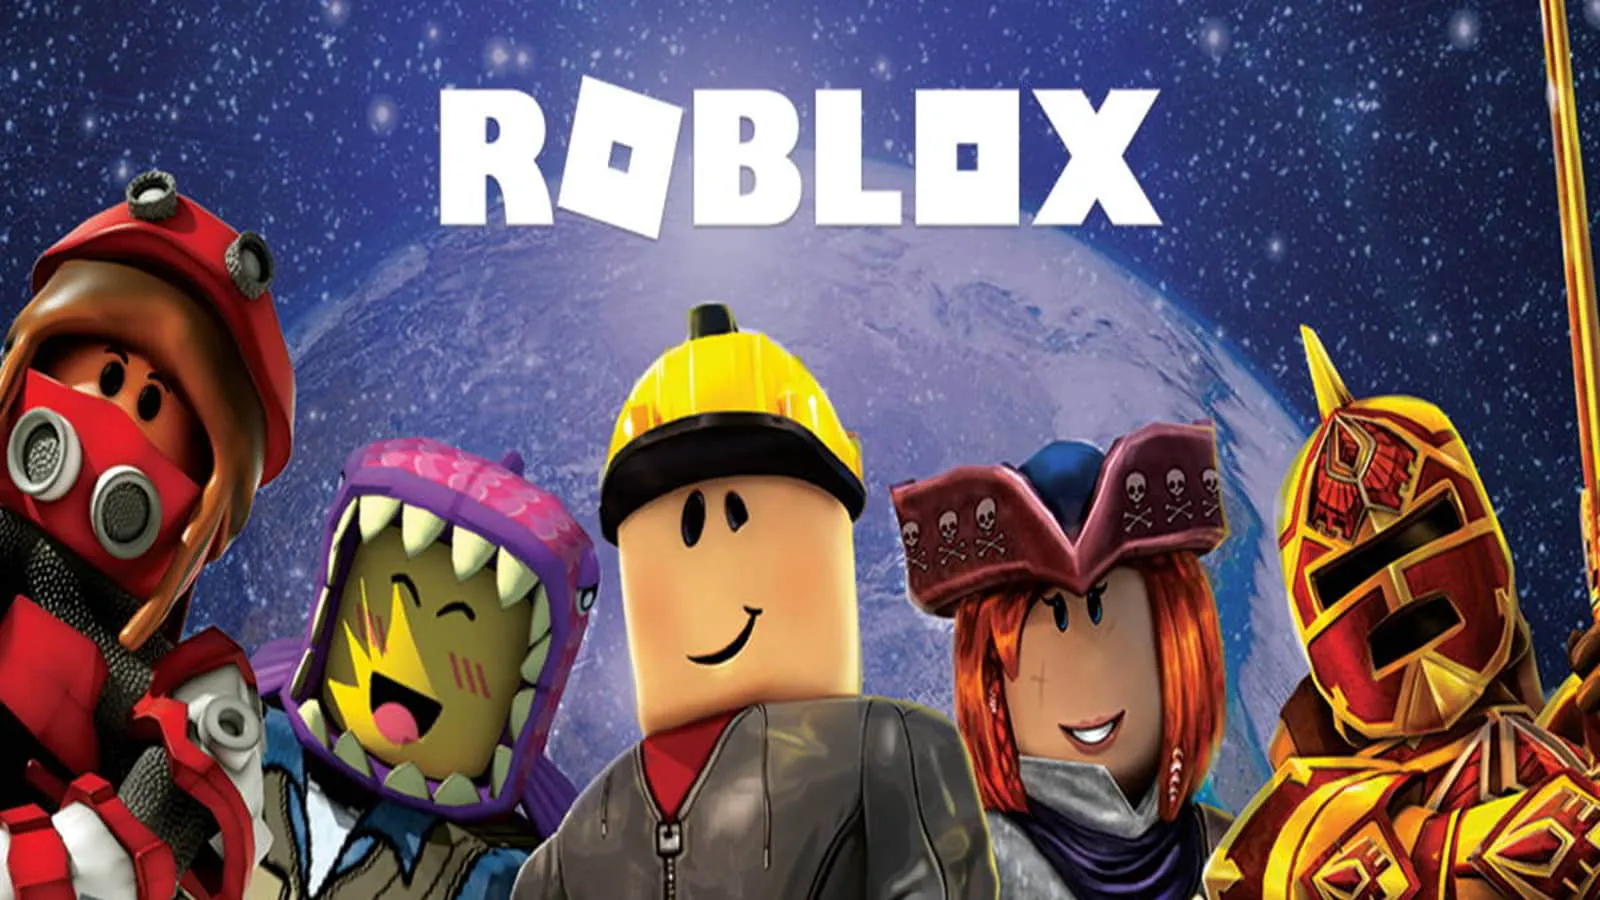 Roblox character gathered over an image of a planet